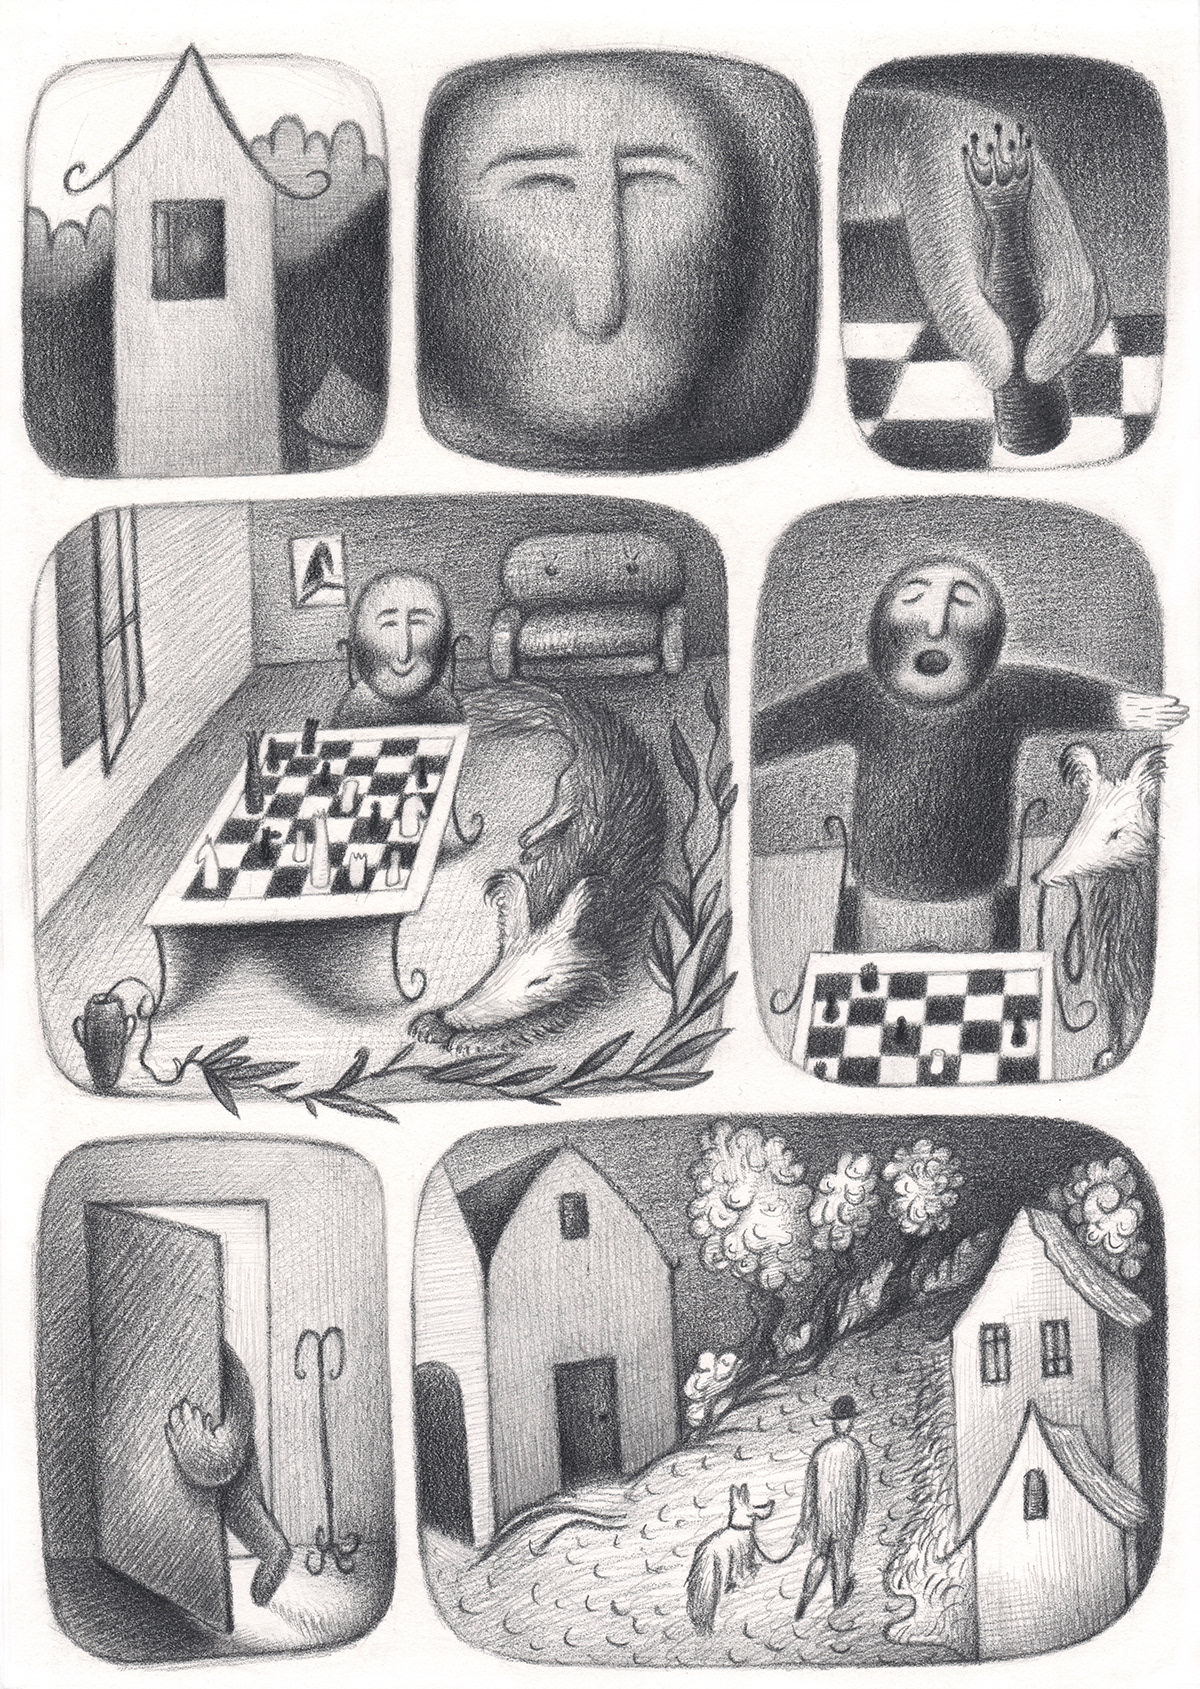 artwork black and white chess comics pencil chessboard Pencil drawing story